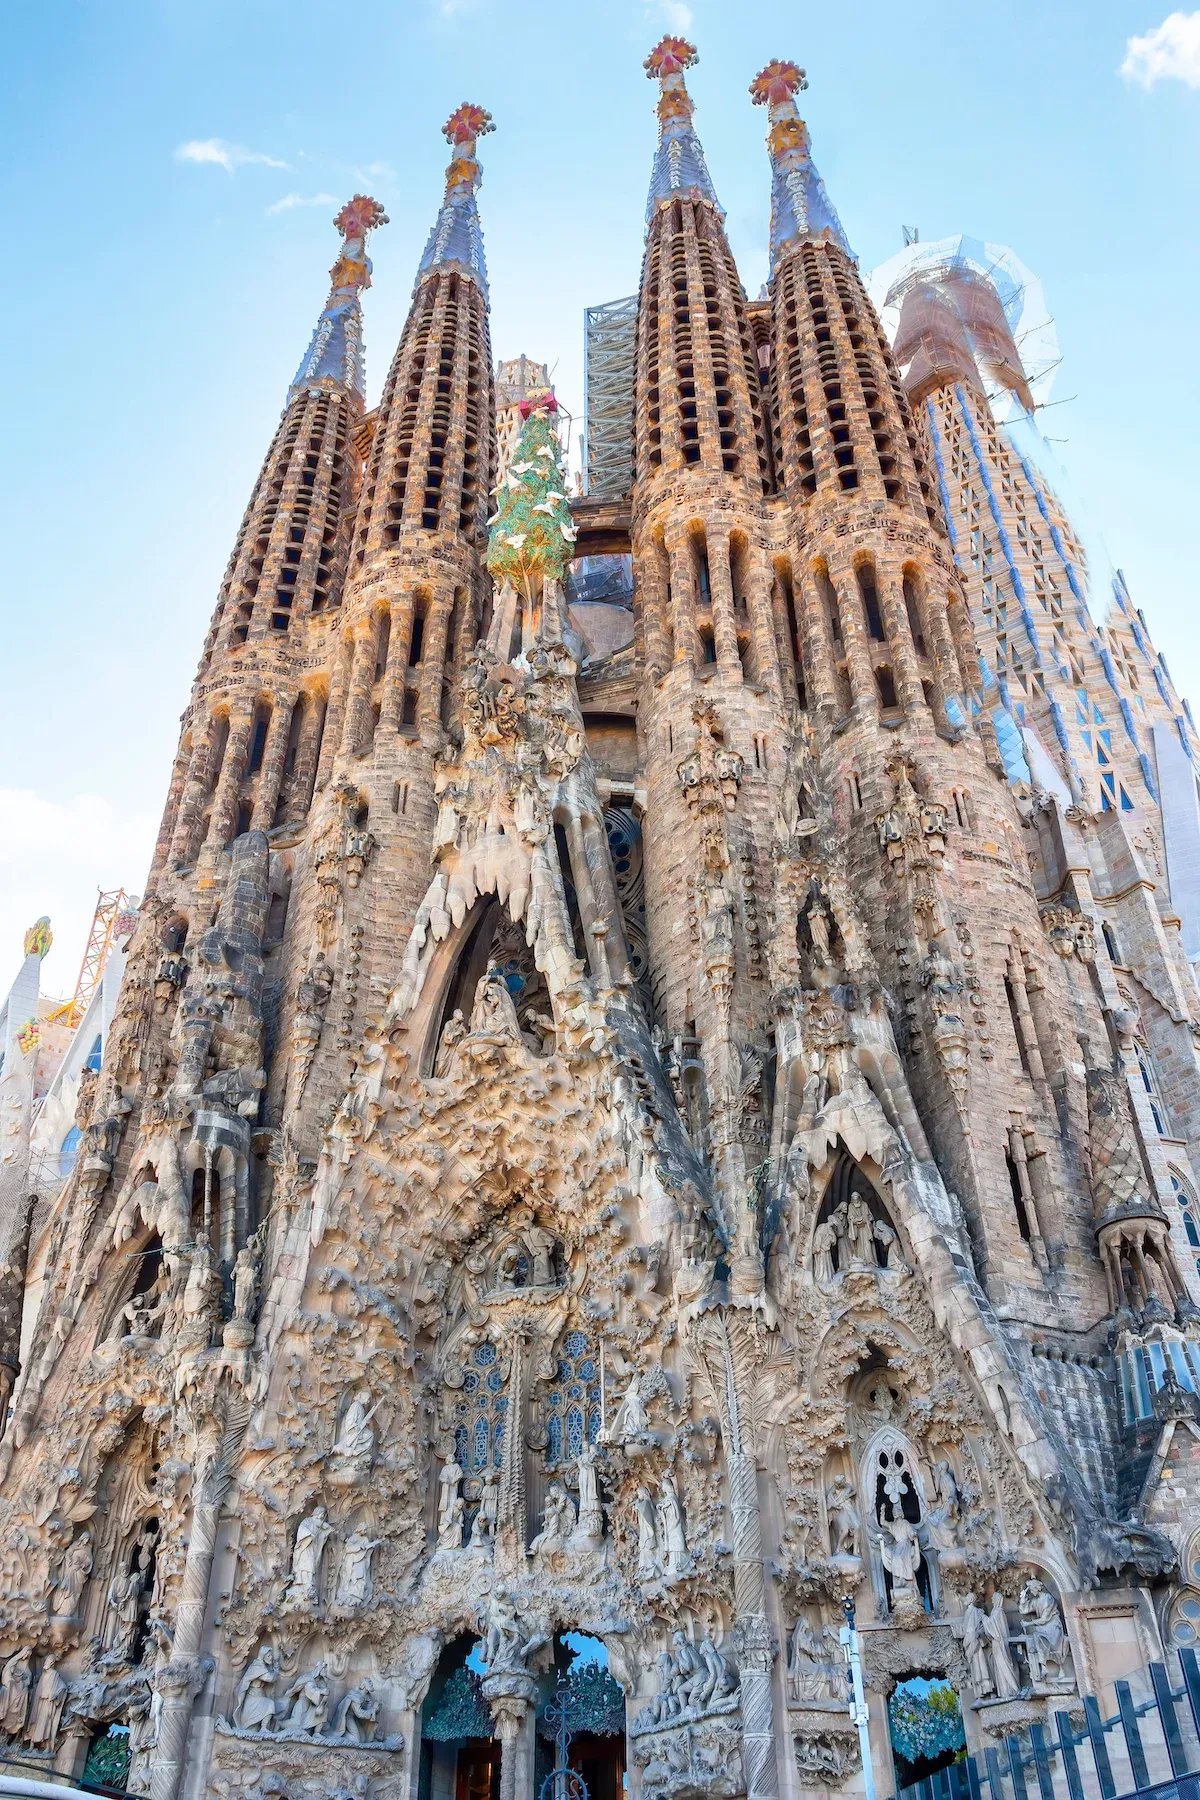 Discovering the Sagrada Familia: Fasades and Chambers